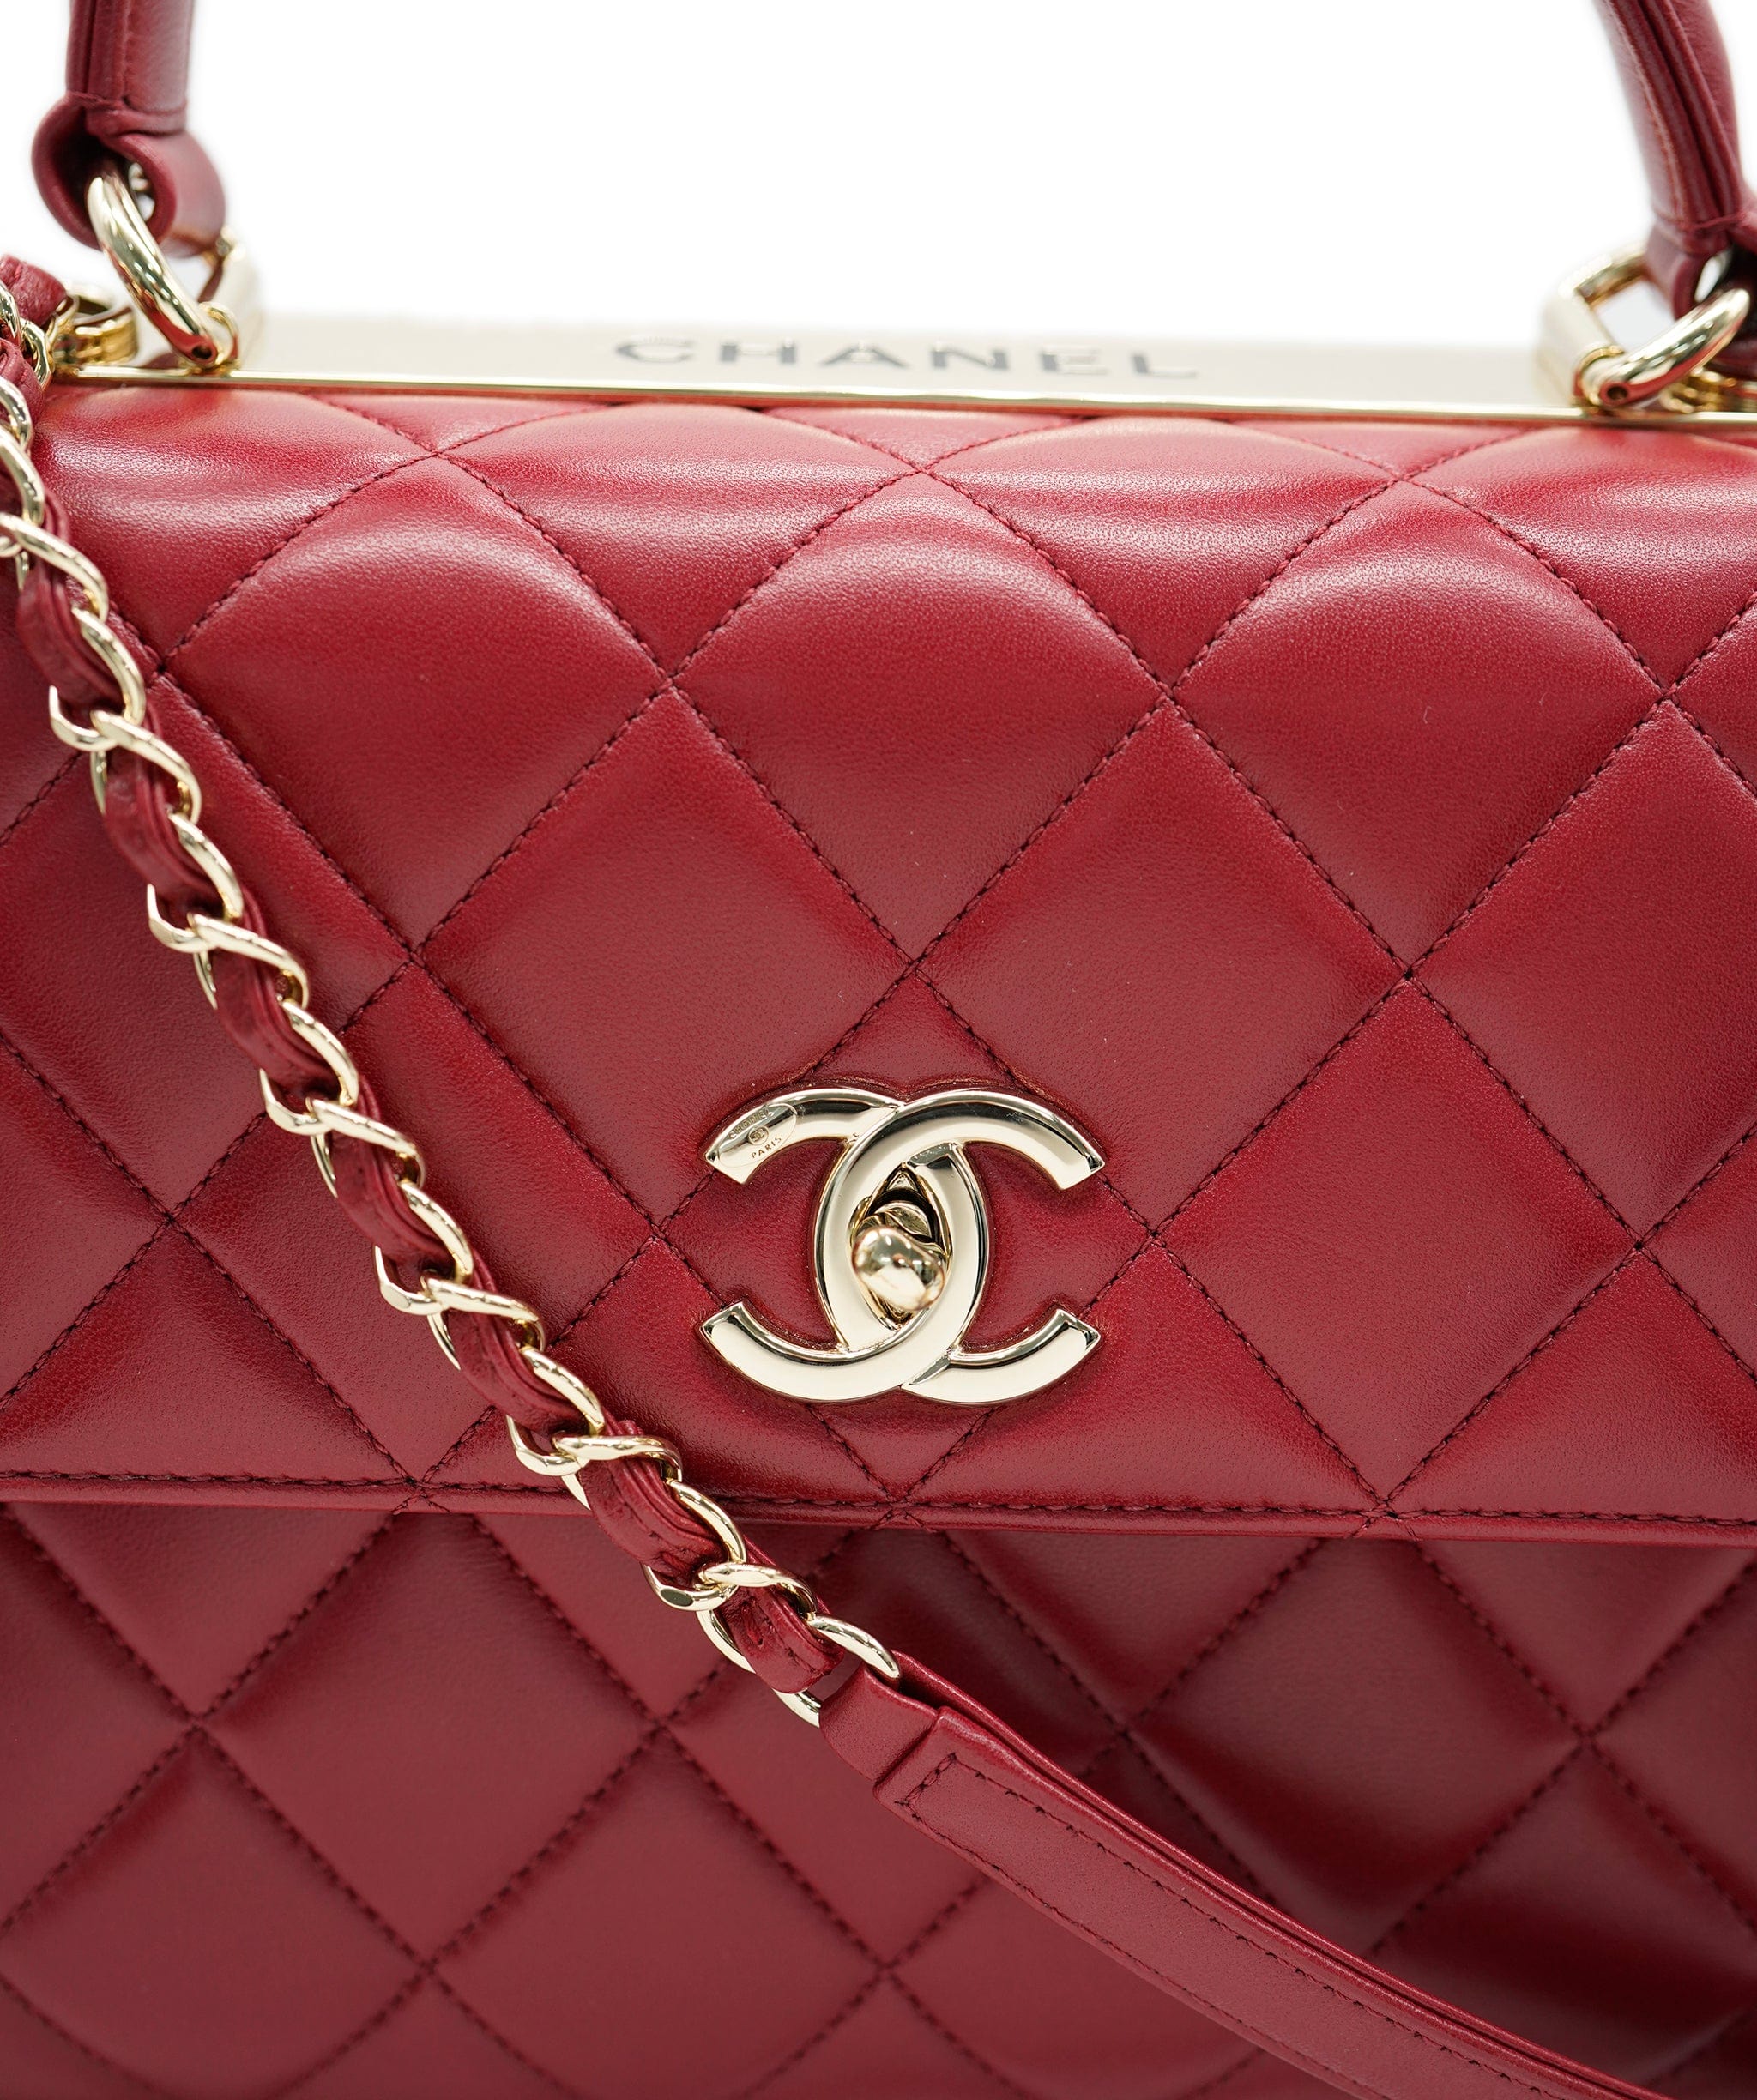 Chanel Chanel trendy large in cherry red GHW AGL2413